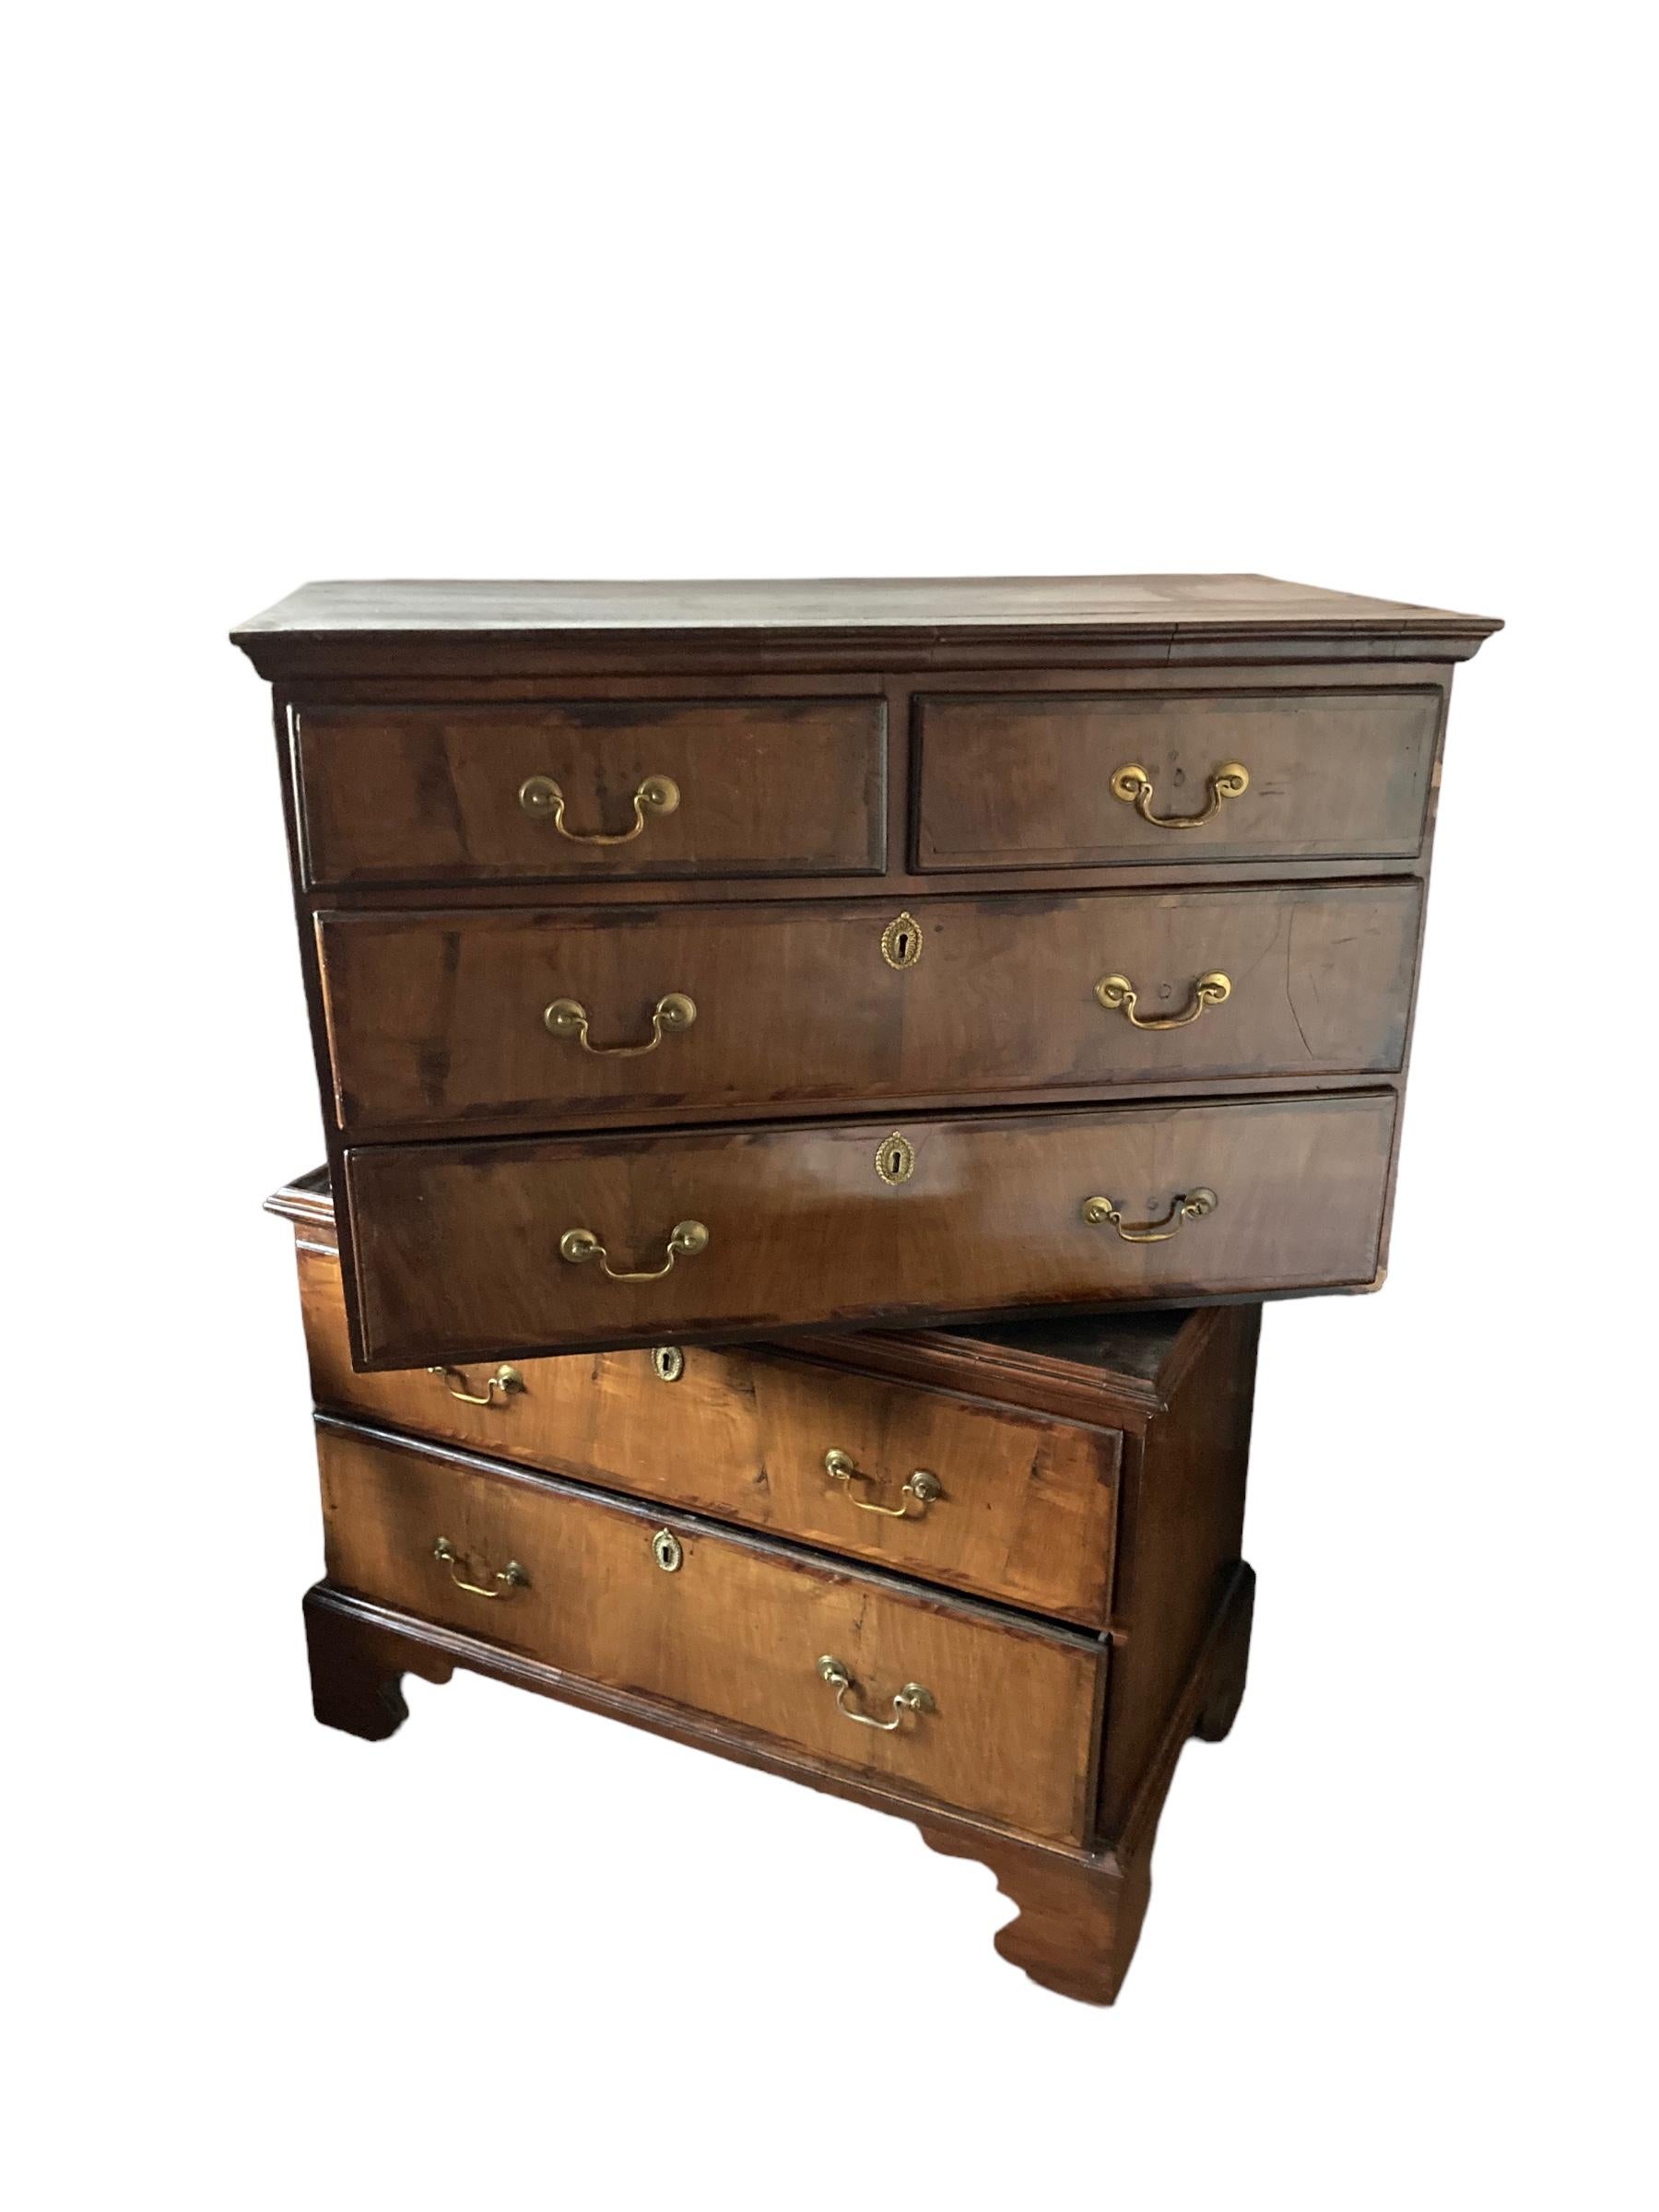 British Antique Late 18th Century George III Walnut Chest on Chest of drawers